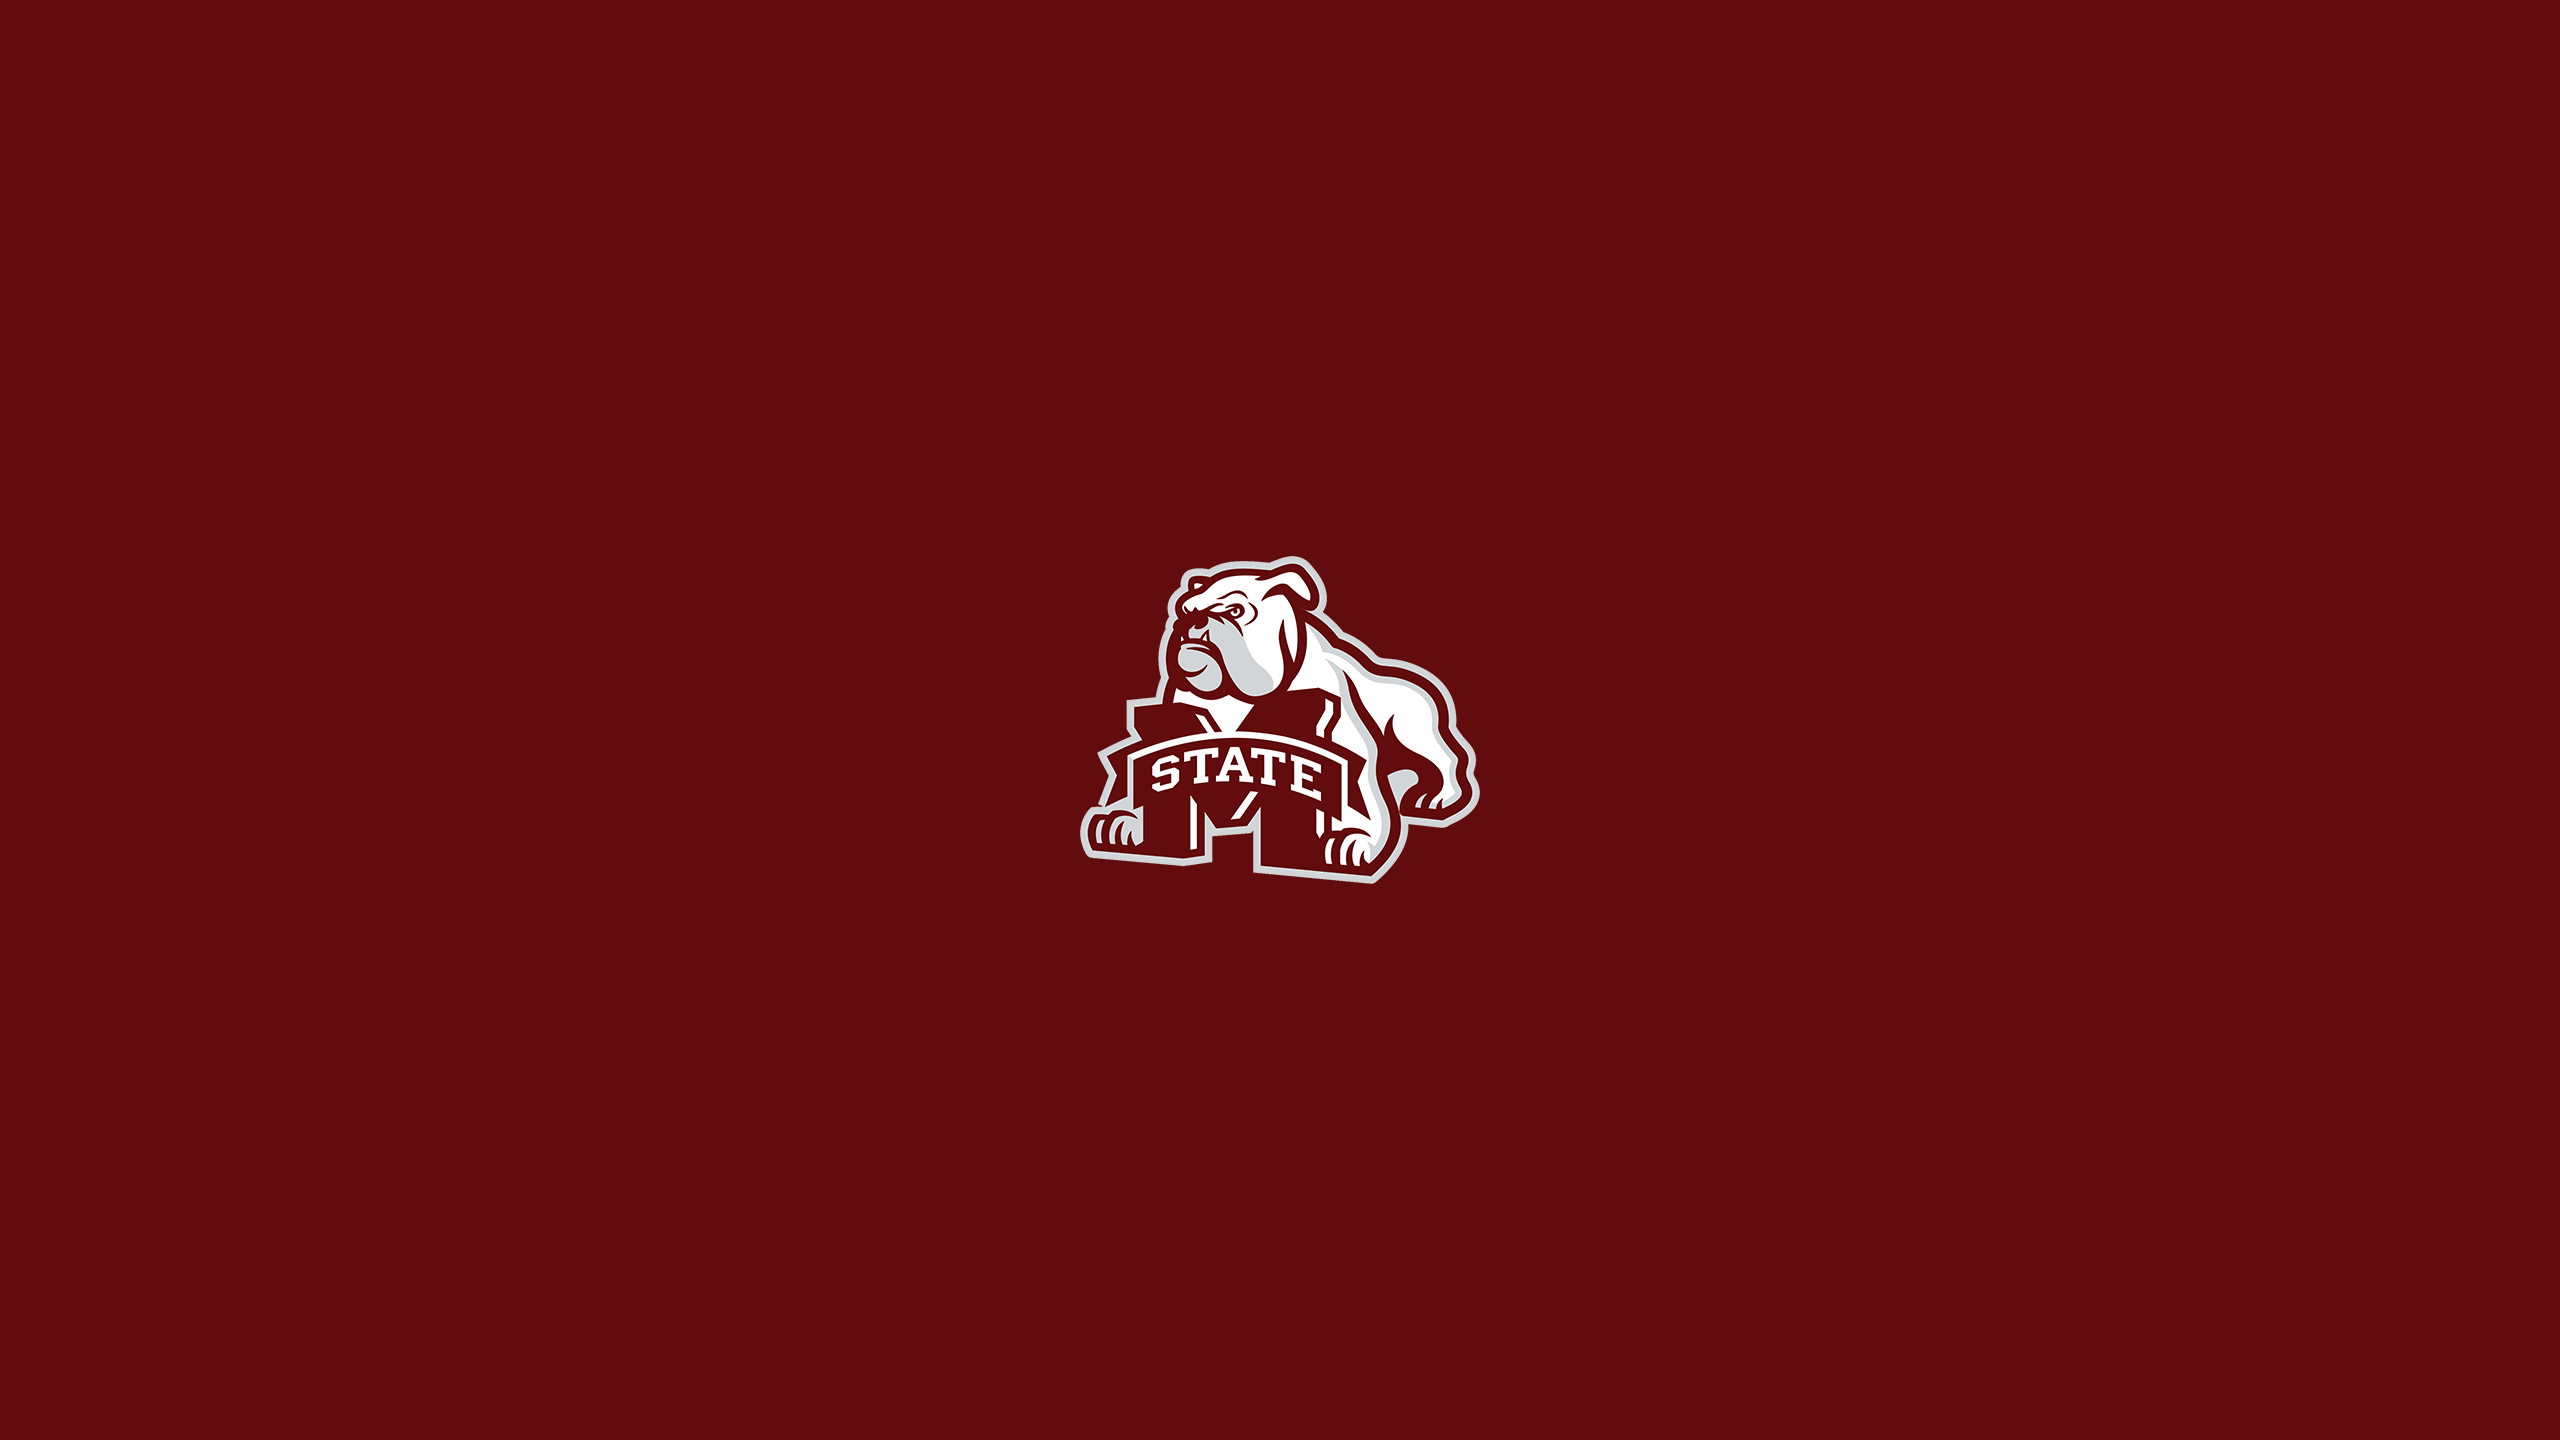 Mississippi State Bulldogs Football - NCAAF - Square Bettor